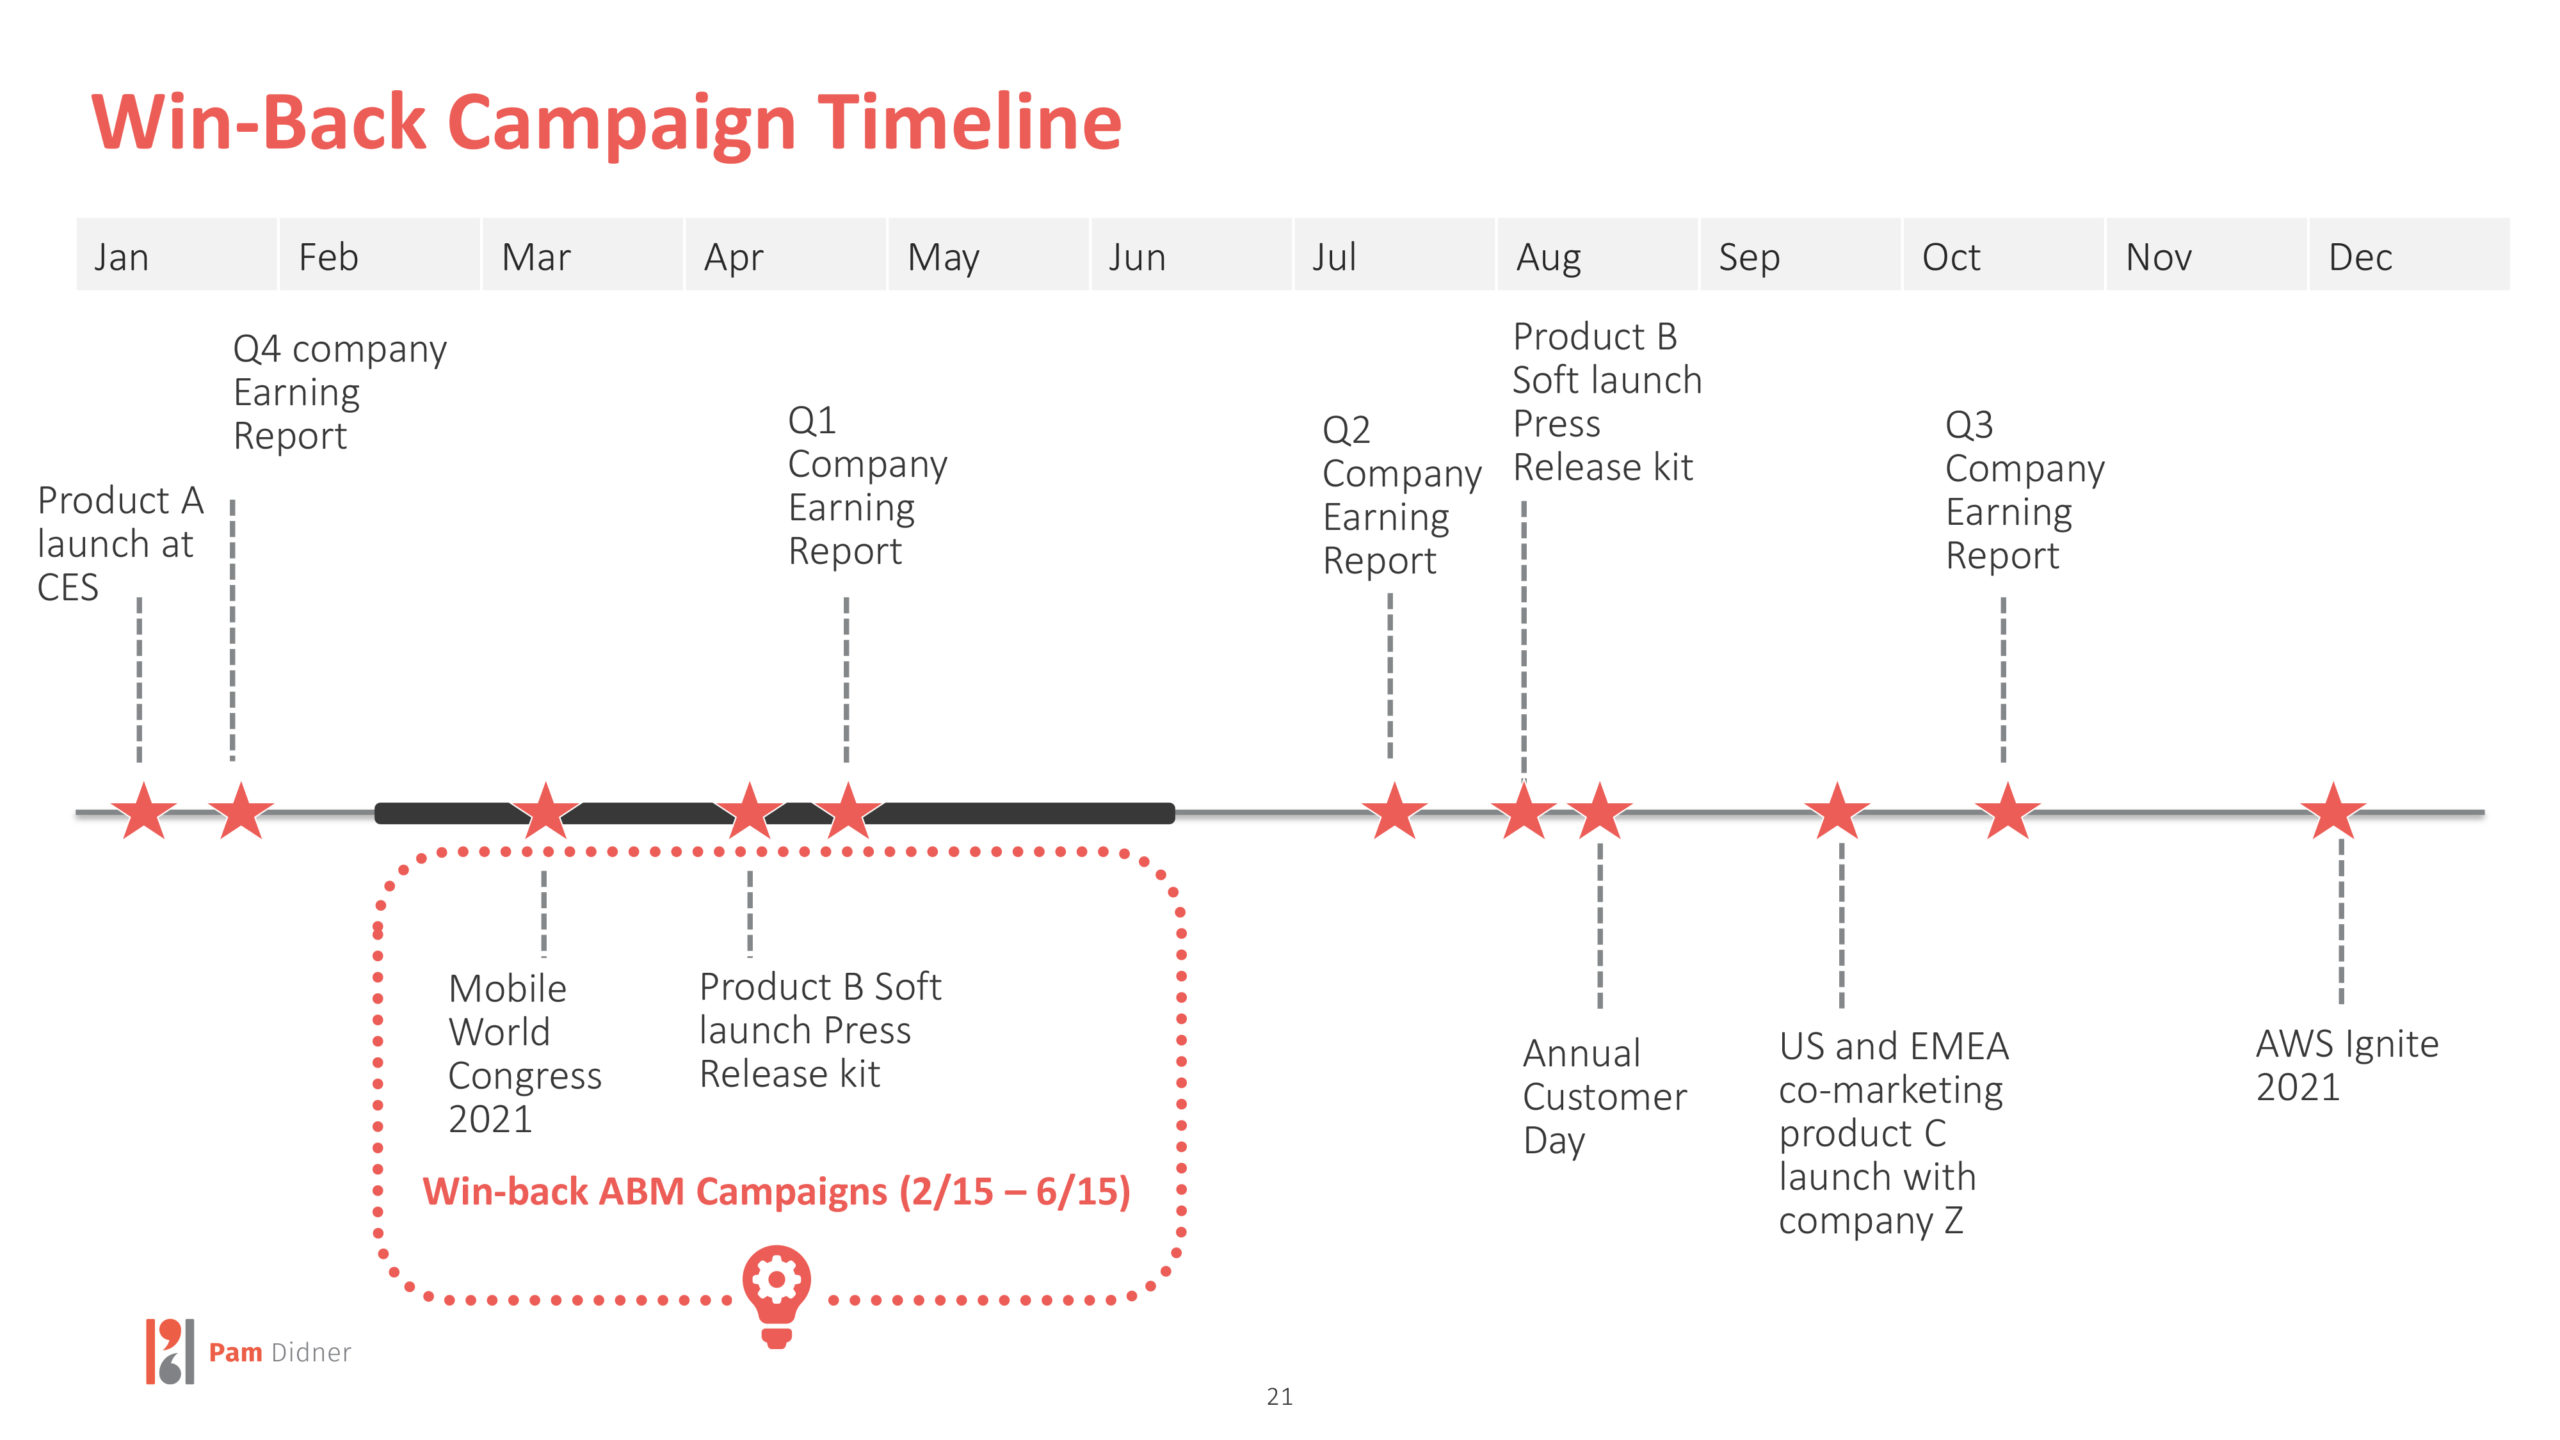 Product launches and campaign timeline